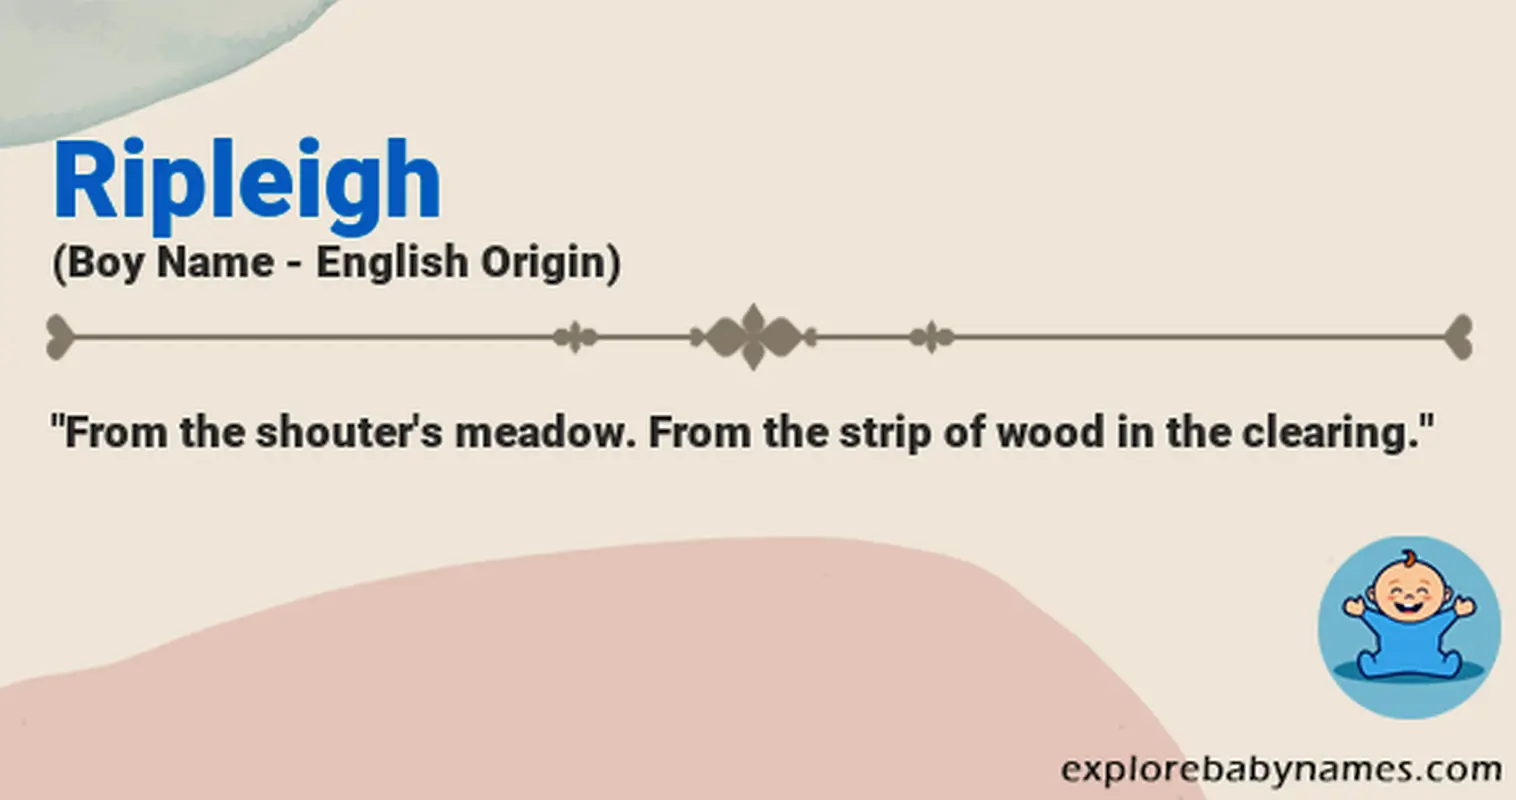 Meaning of Ripleigh